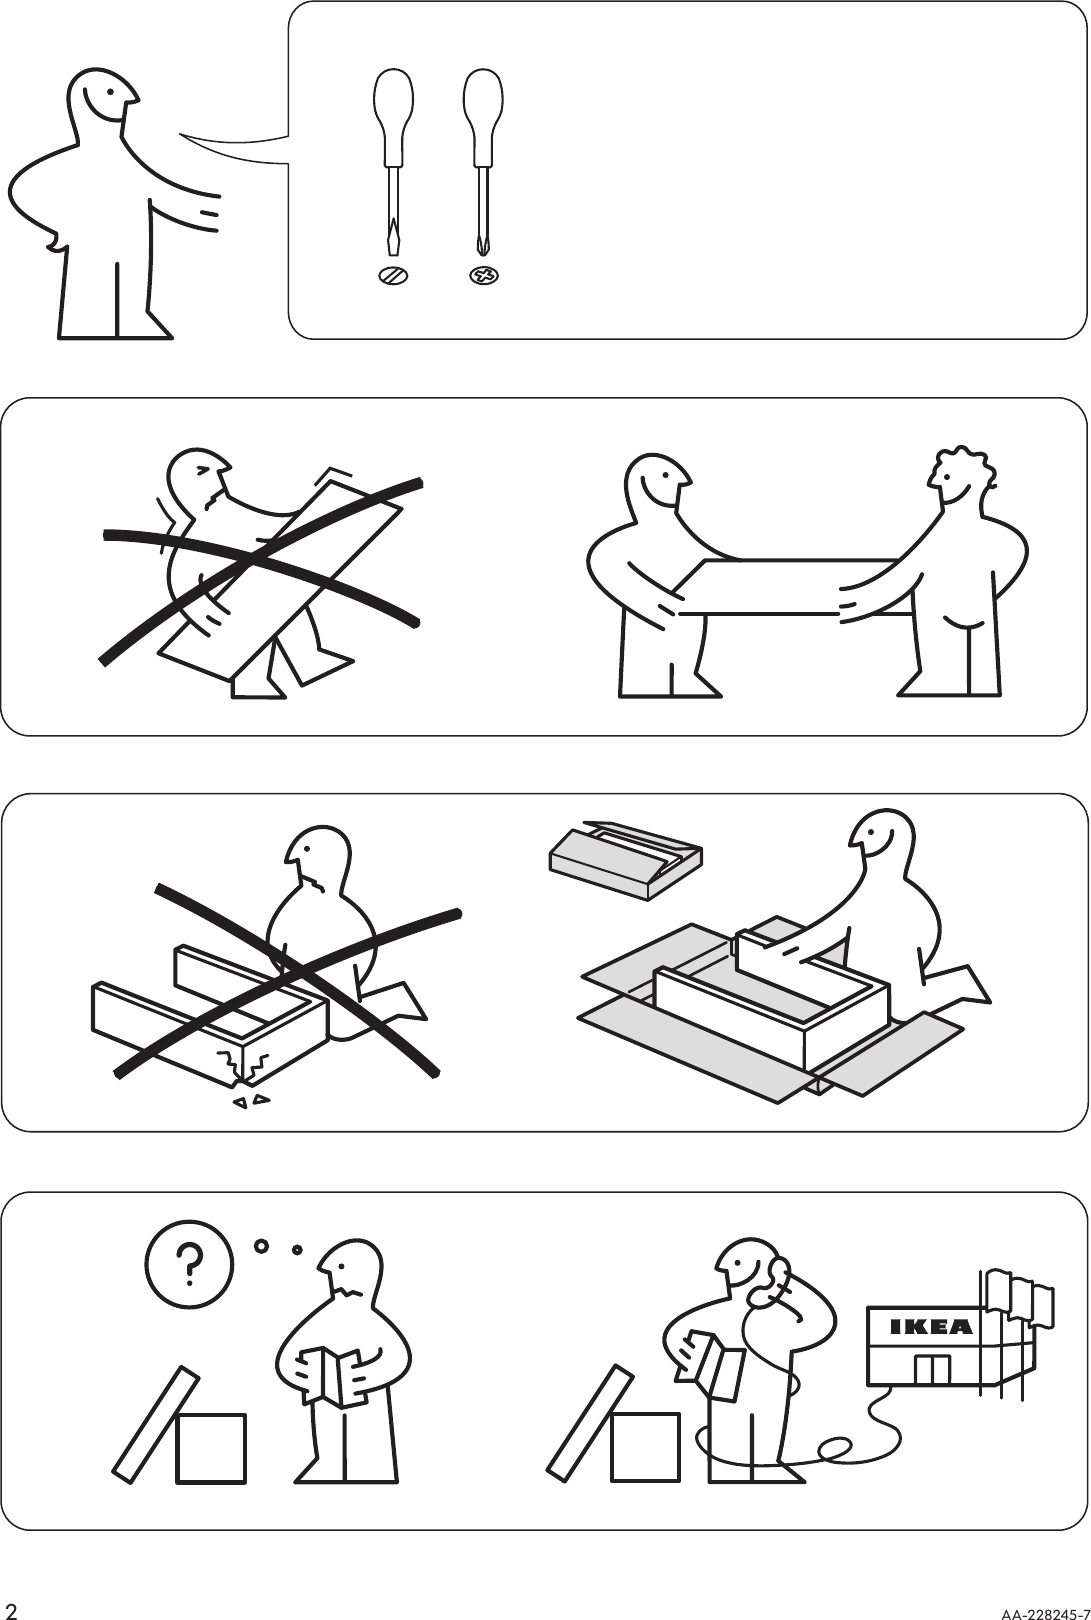 Page 2 of 12 - Ikea Ikea-Bjursta-Extendable-Dining-Table-69-86-102-X37-Assembly-Instruction